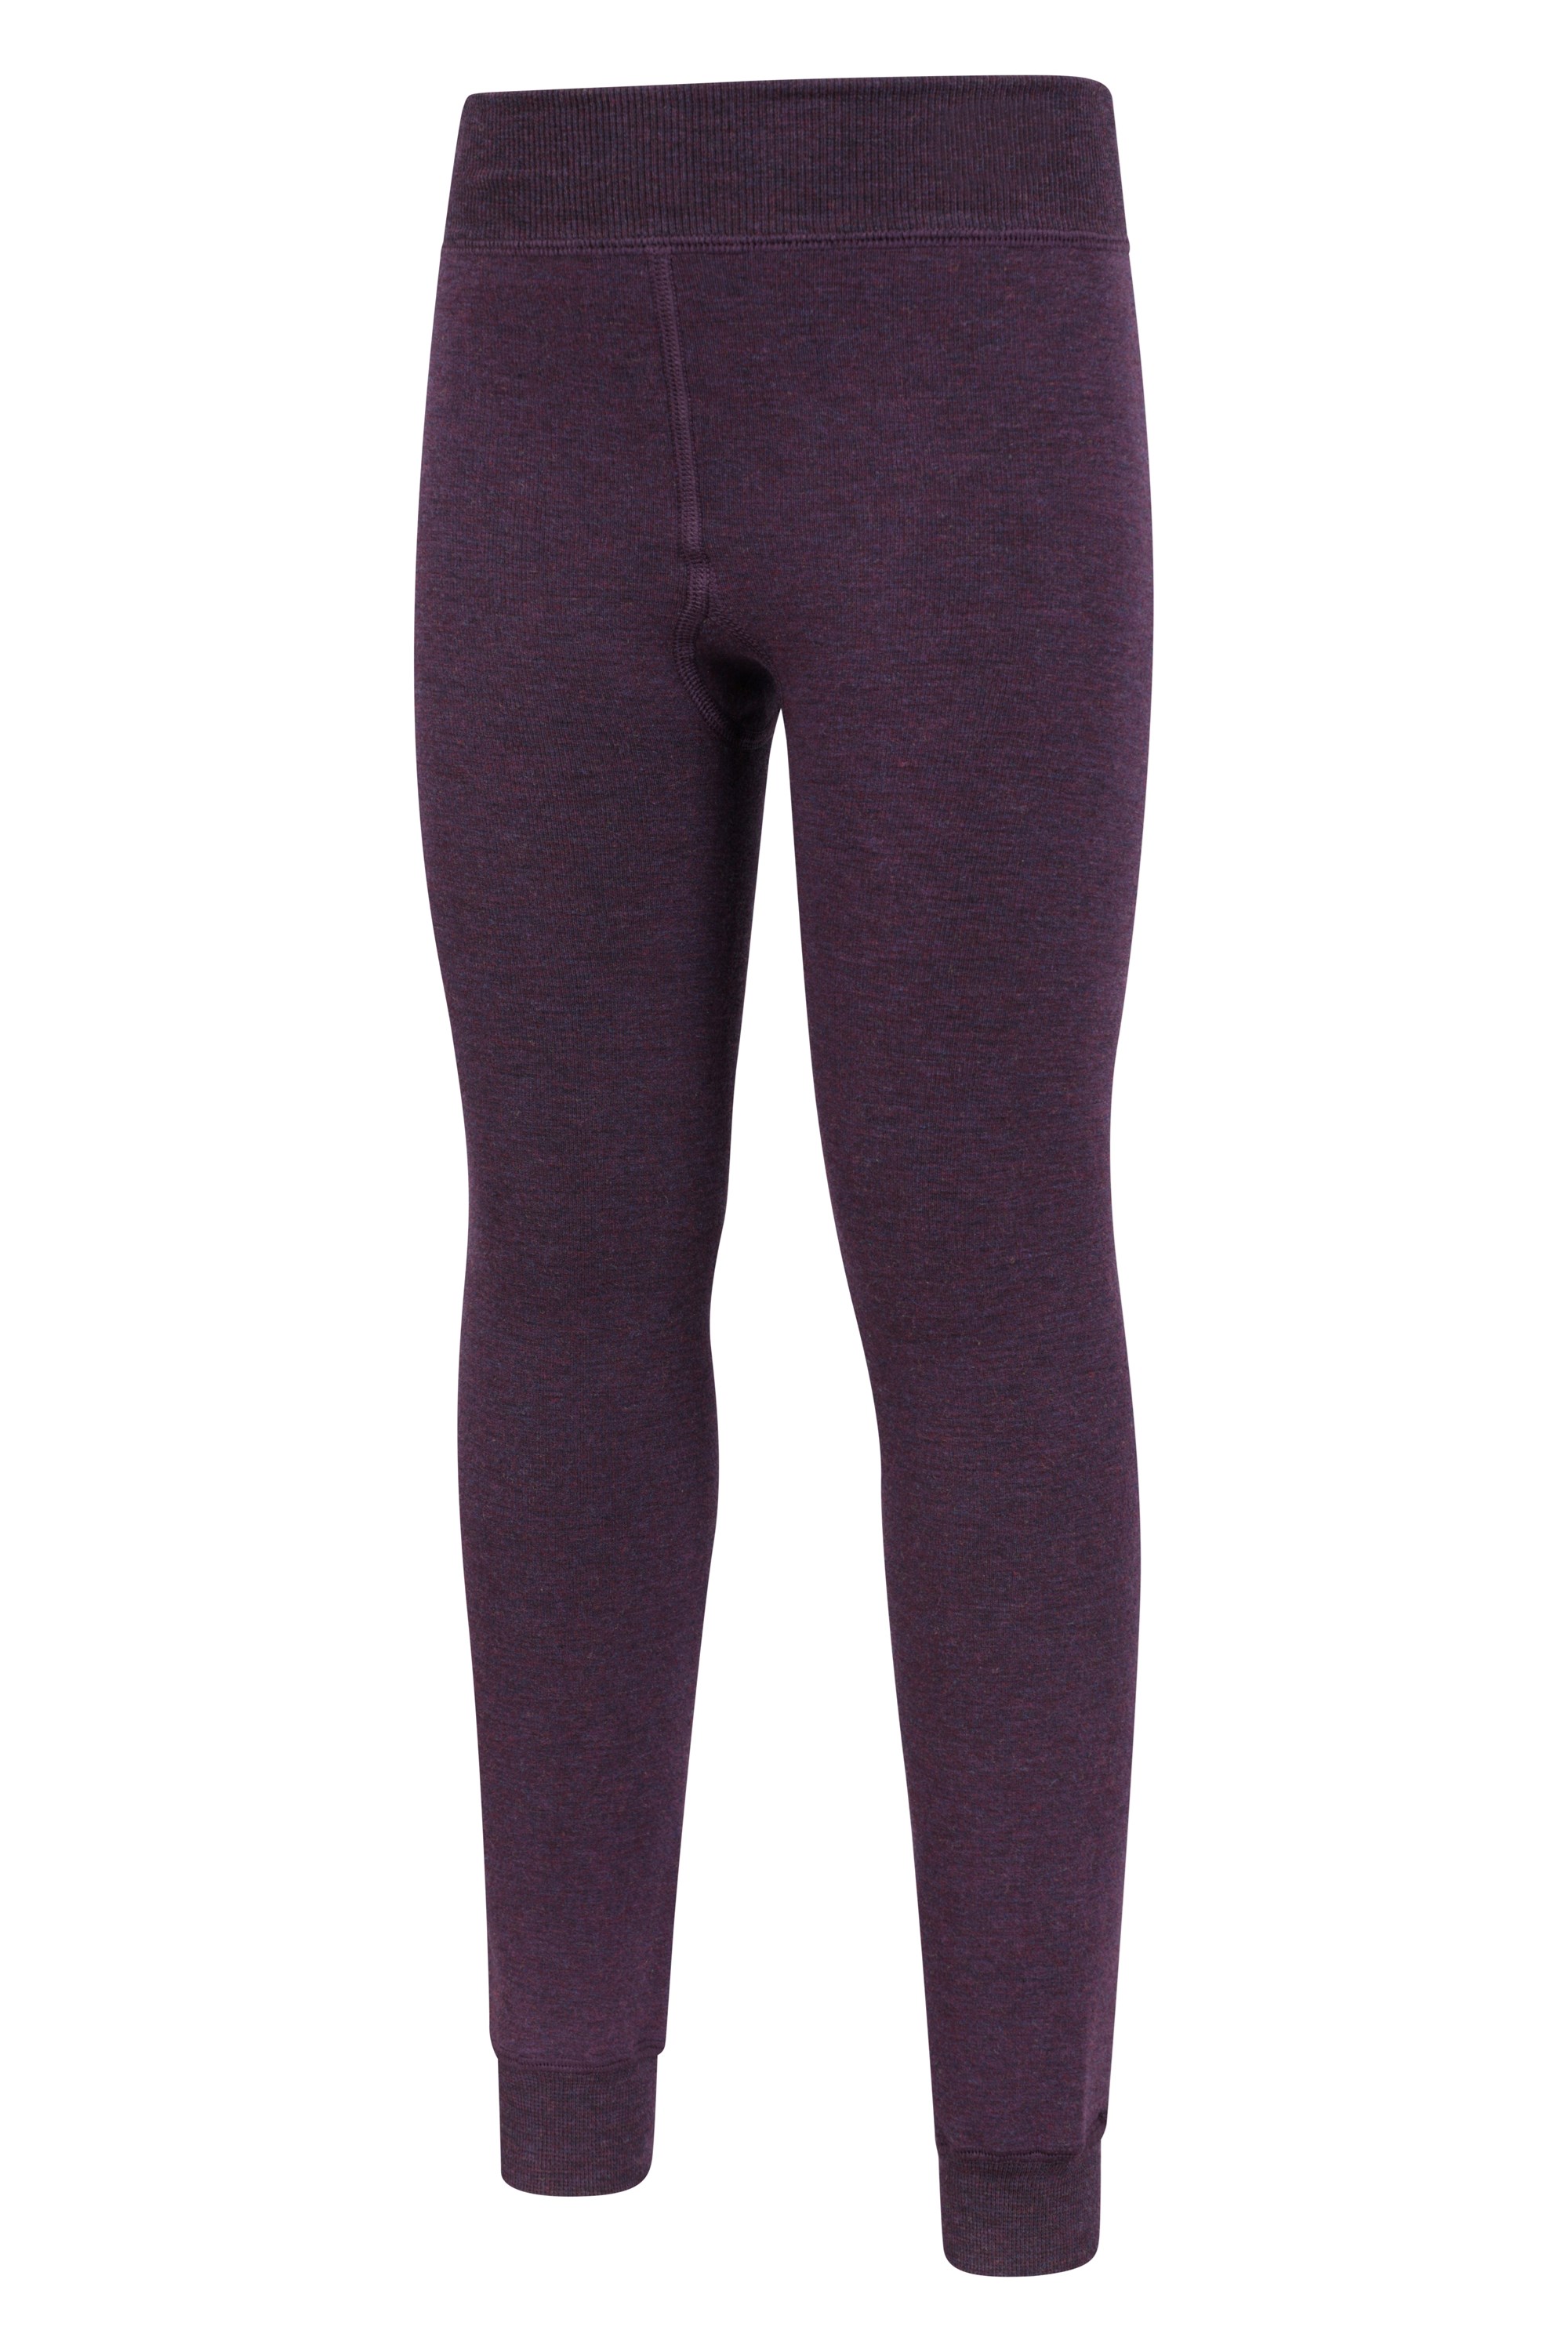 The North Face Flashdry fleece lined legging womens size XS PURPLE